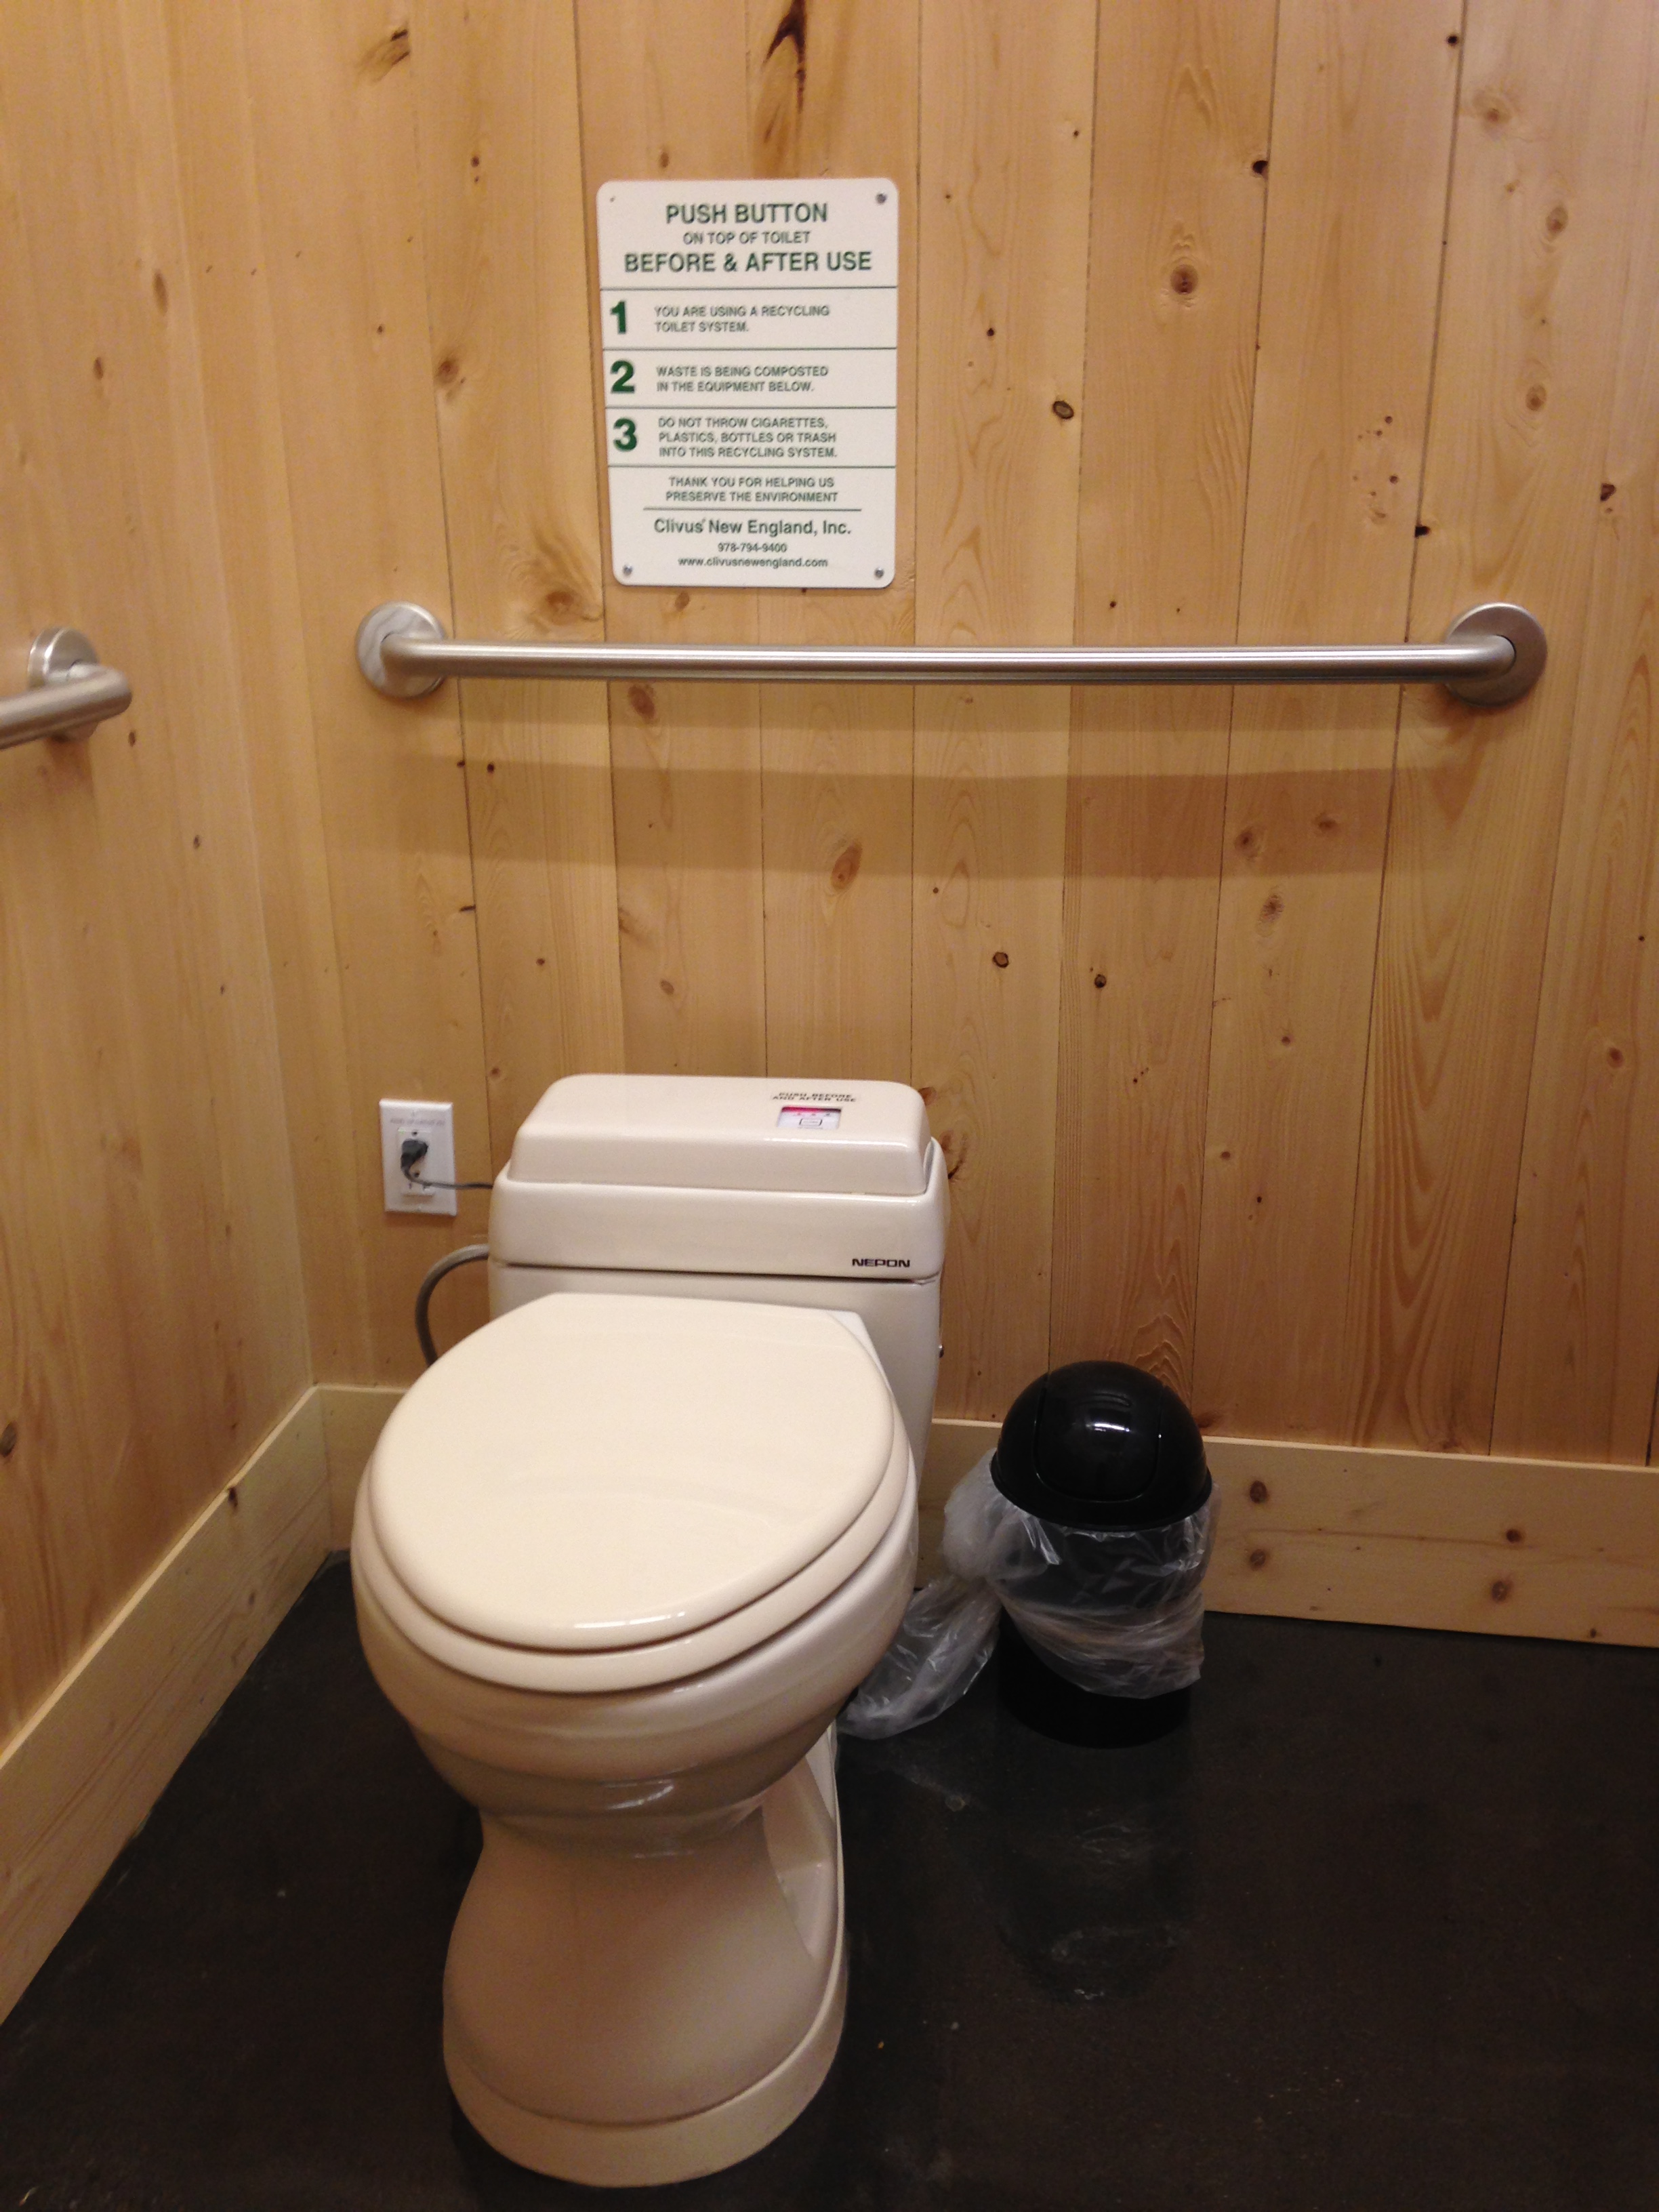  Normally we wouldn’t be posting photos of the toilets, but these are composting toilets! The toilets are connected to a composting unit in the basement, where solid waste is turned into compost. 